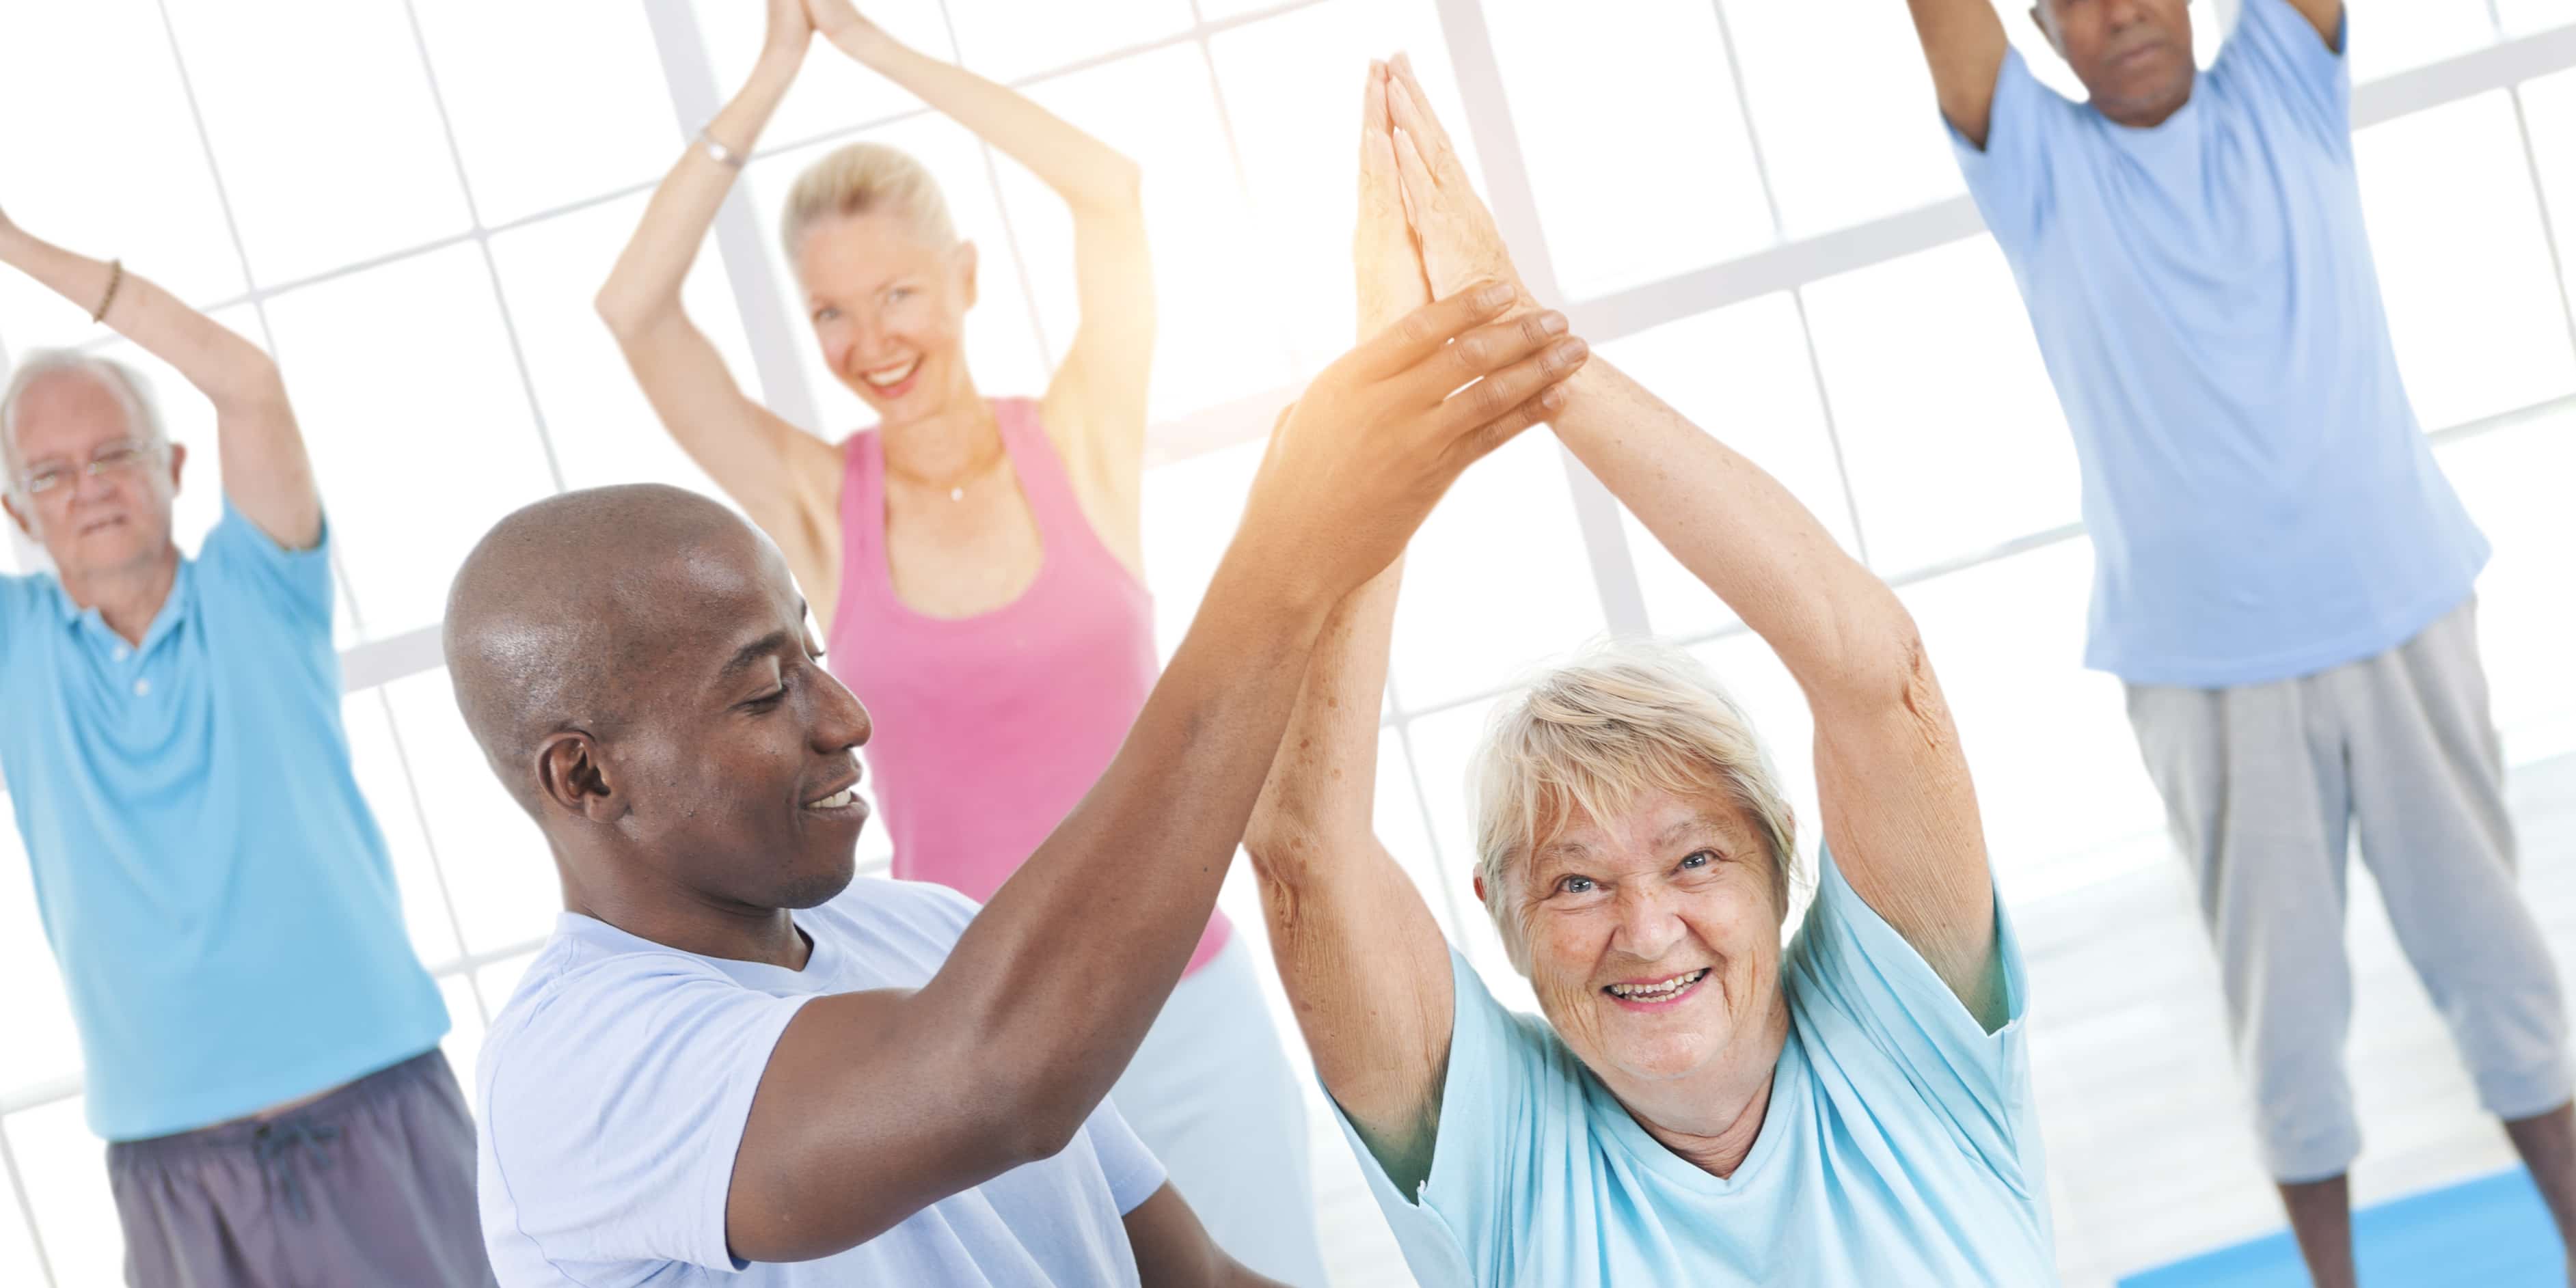 Balance exercises for seniors can be done in groups